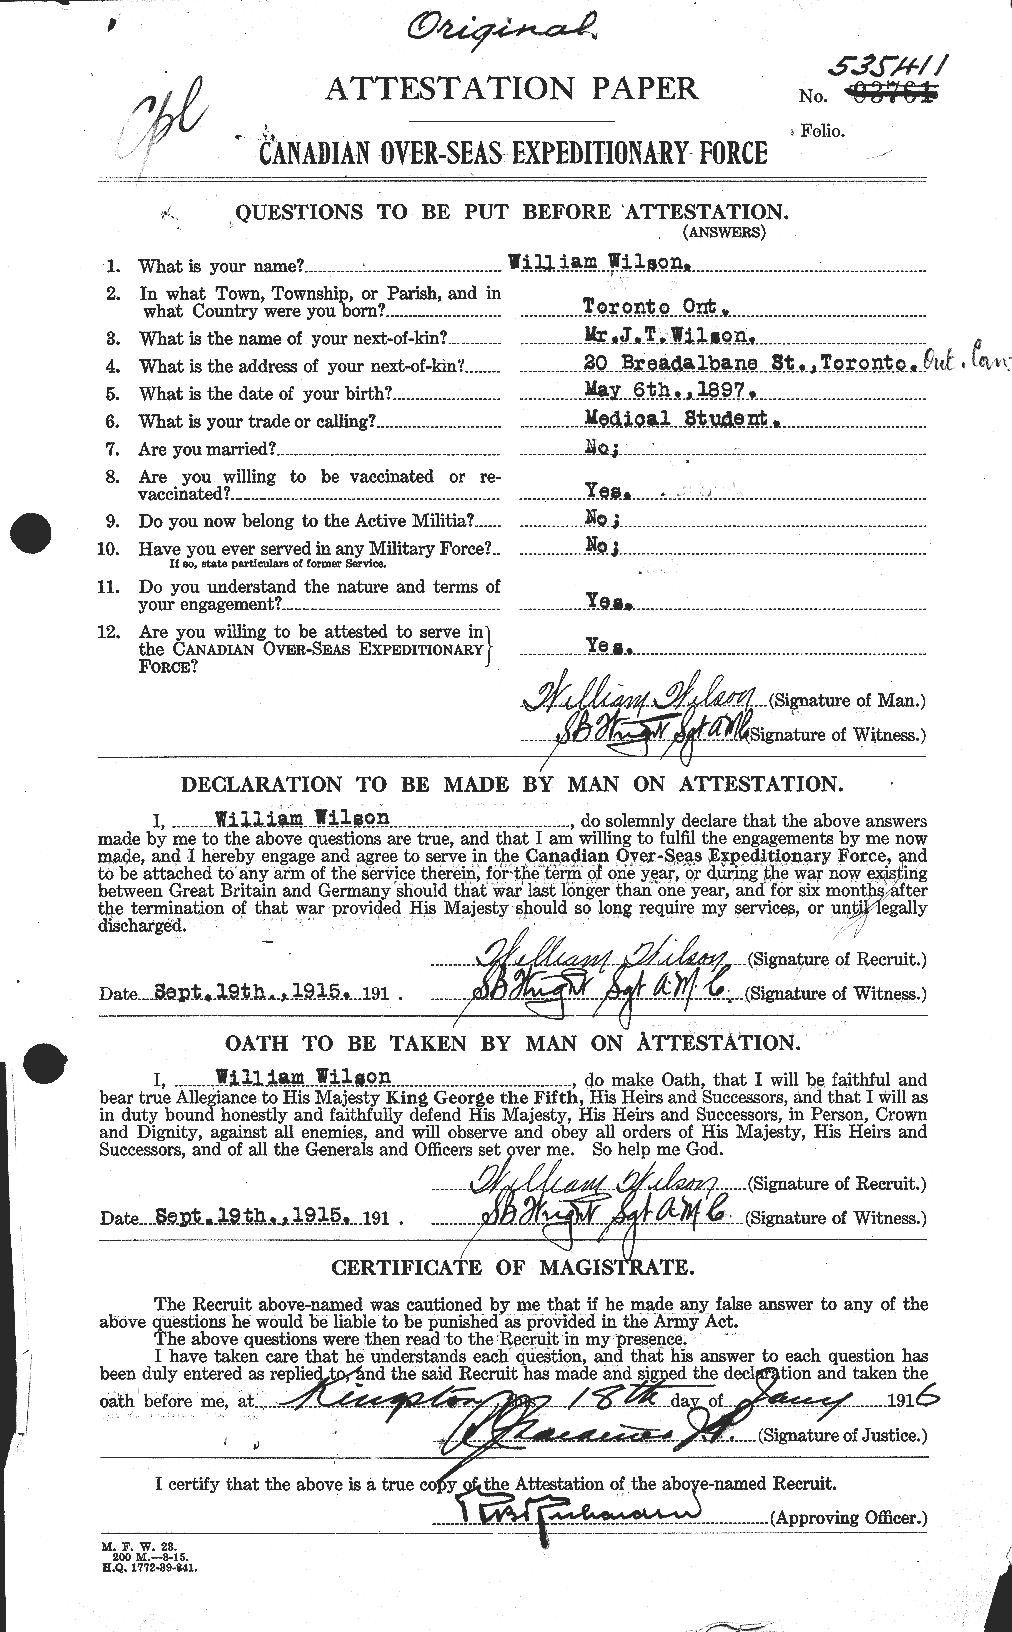 Personnel Records of the First World War - CEF 681876a